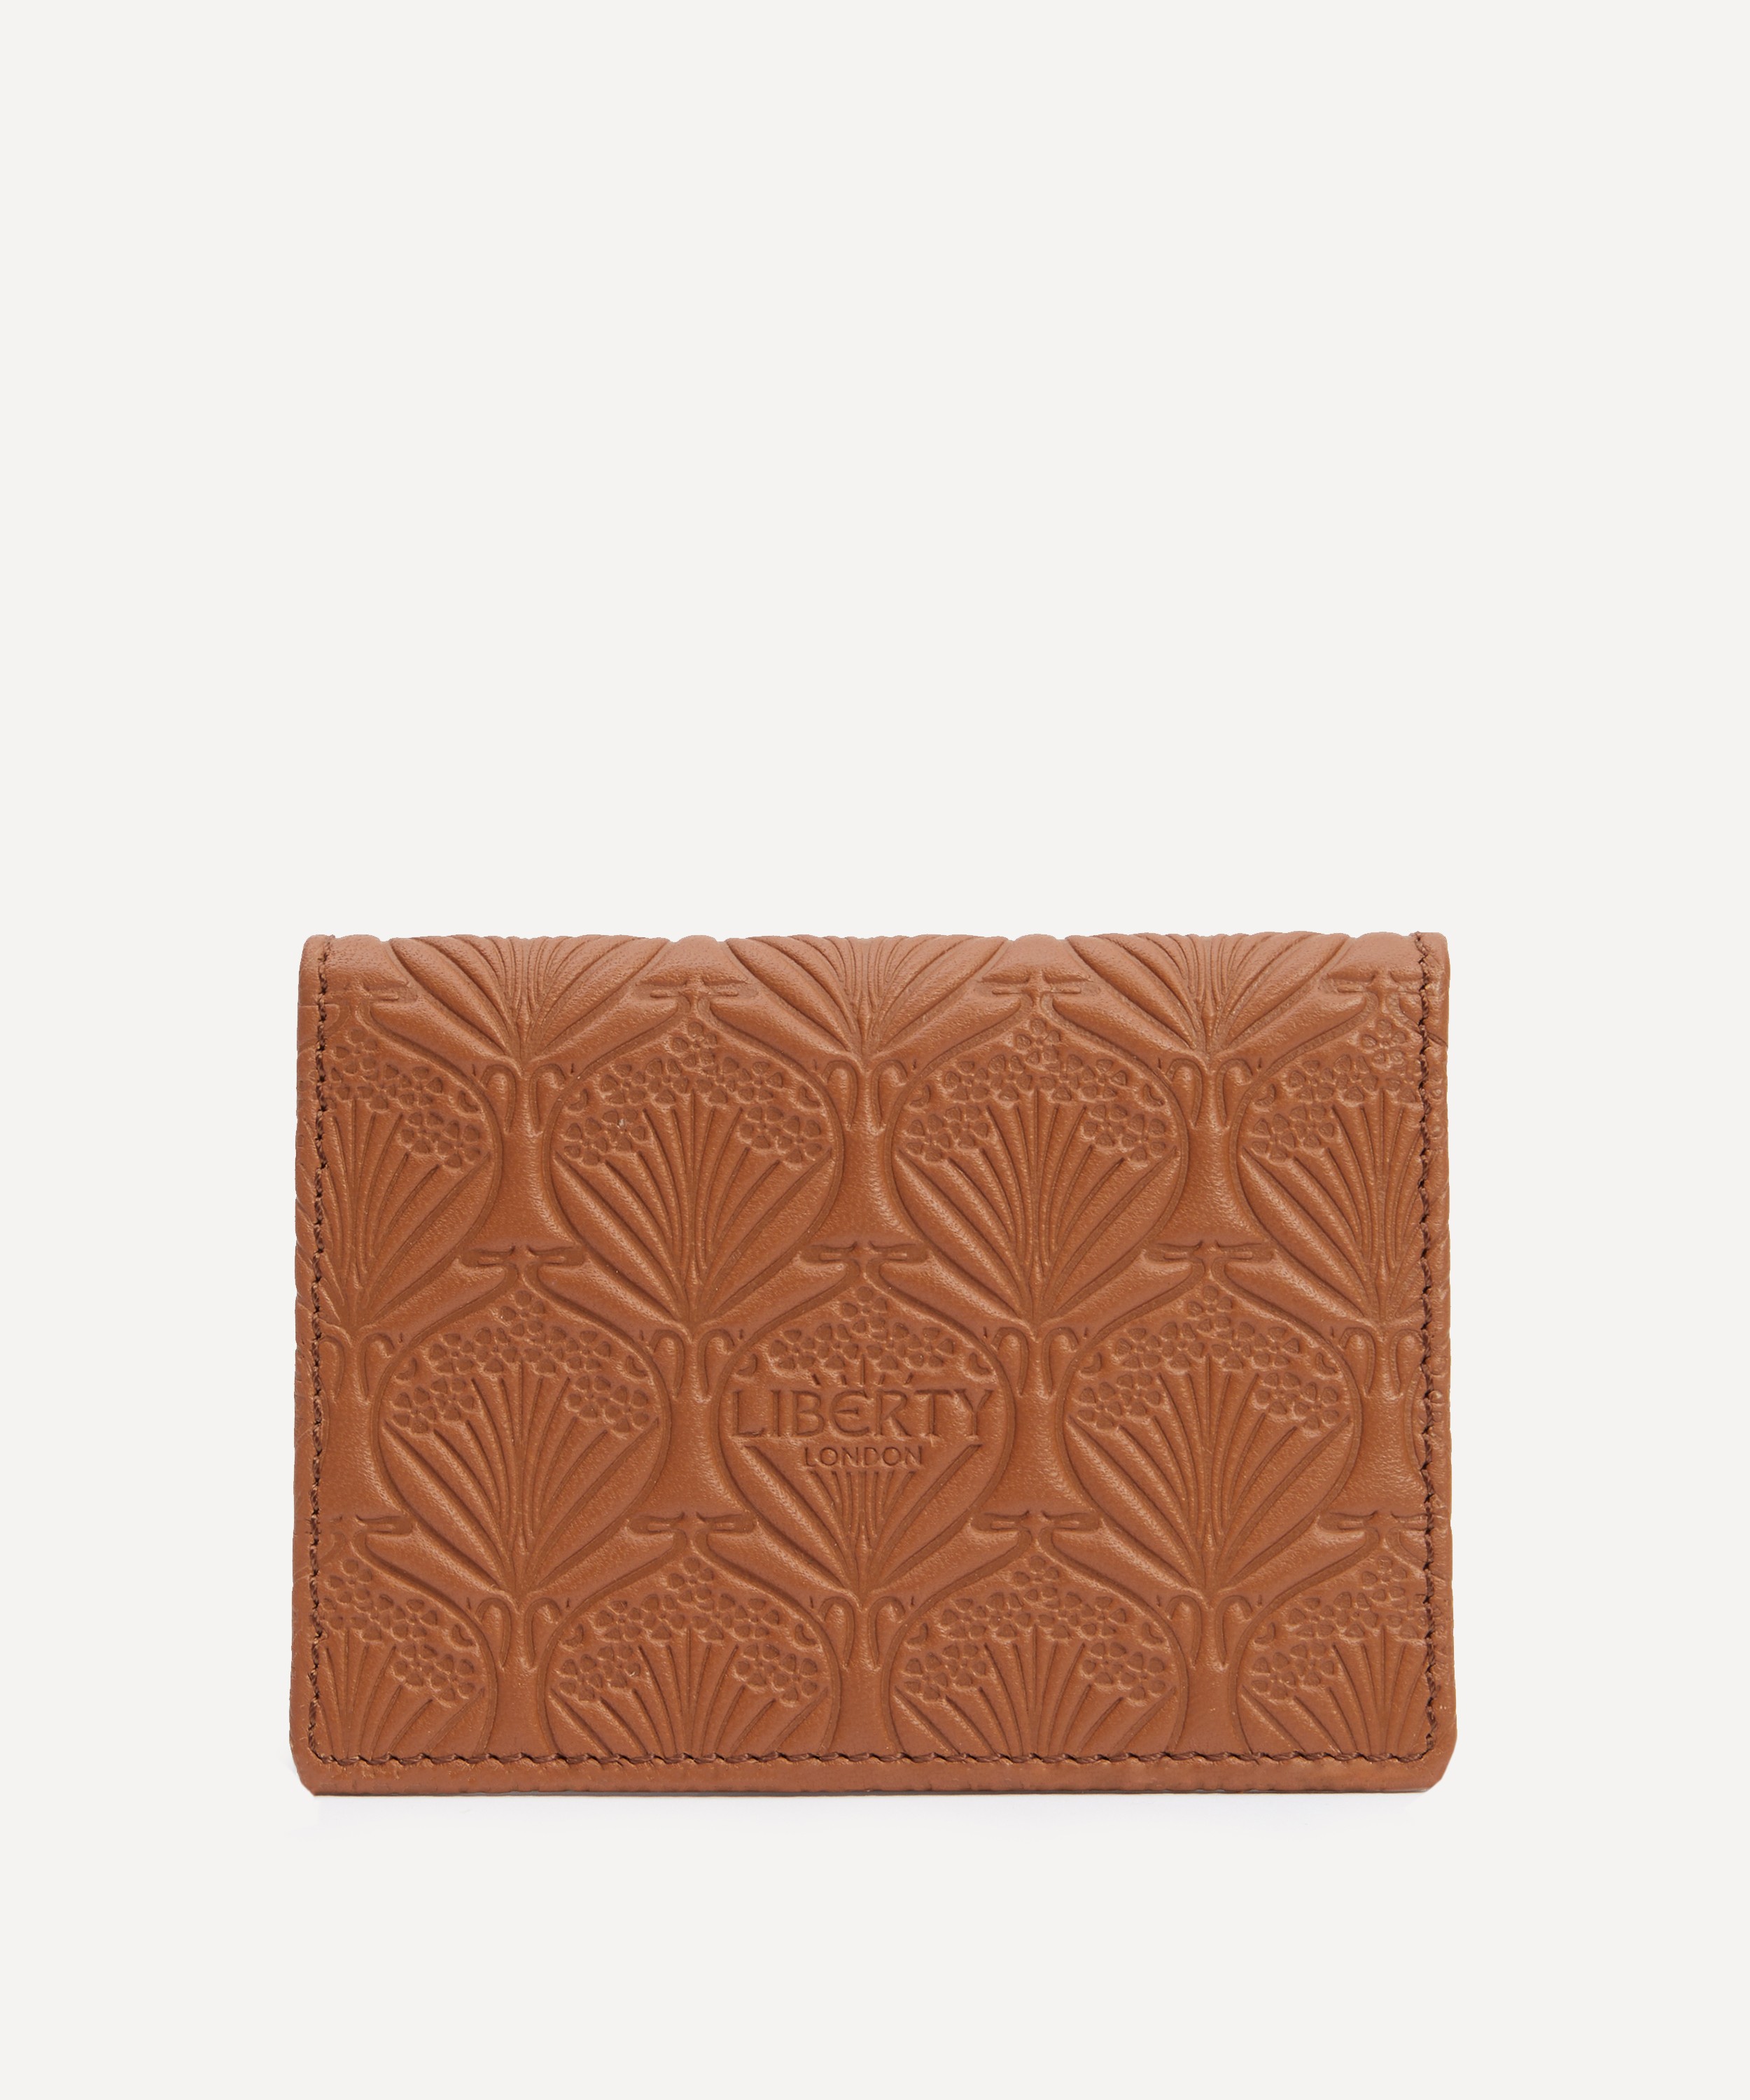 Liberty - Iphis Embossed Leather Travel Card Holder